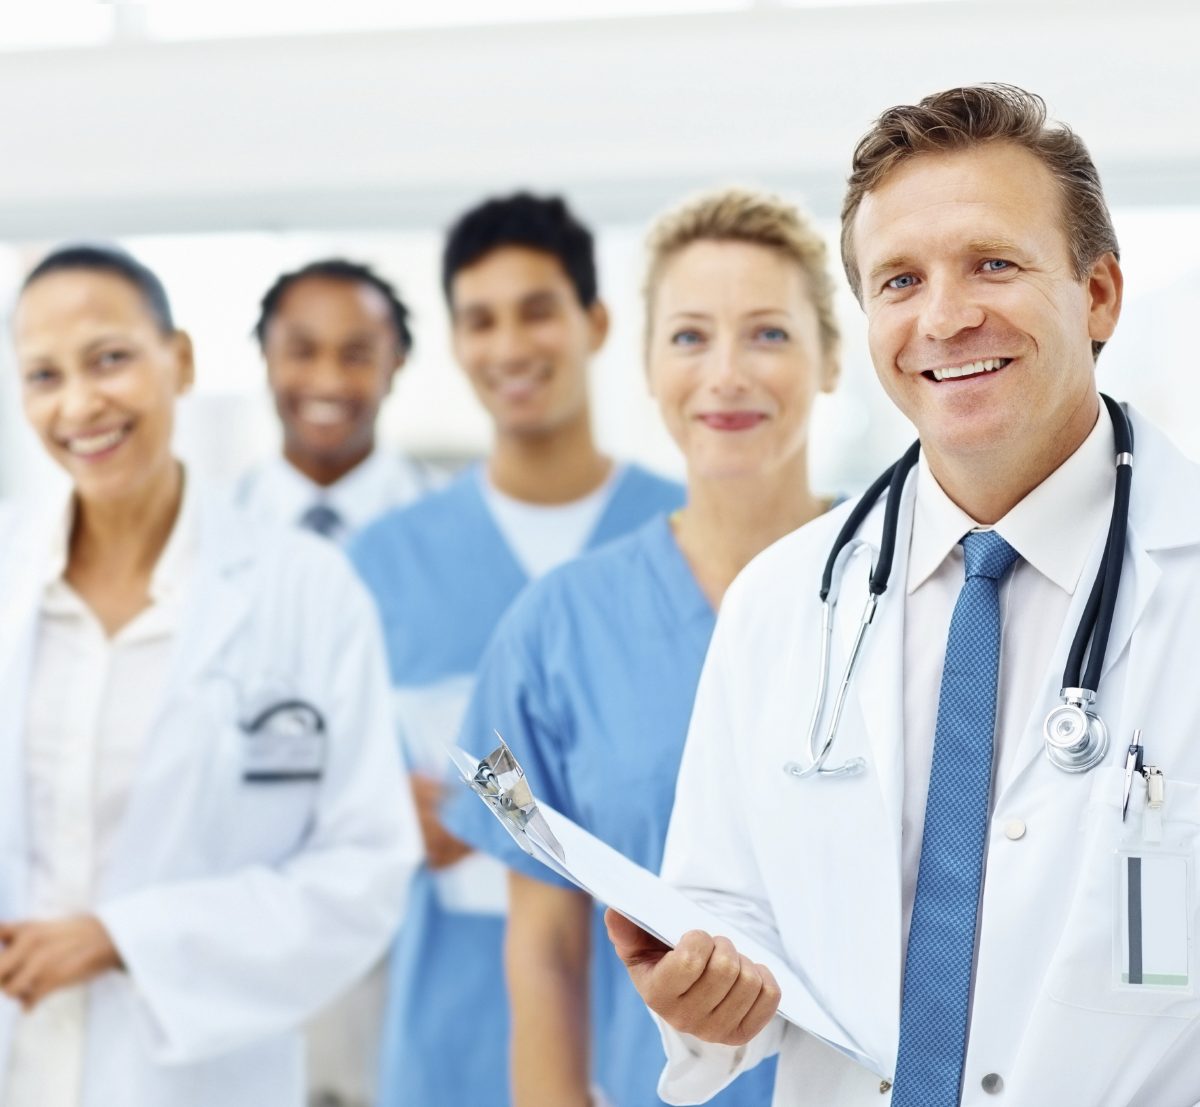 Why Do Doctors and Hospitals Need Online Marketing?